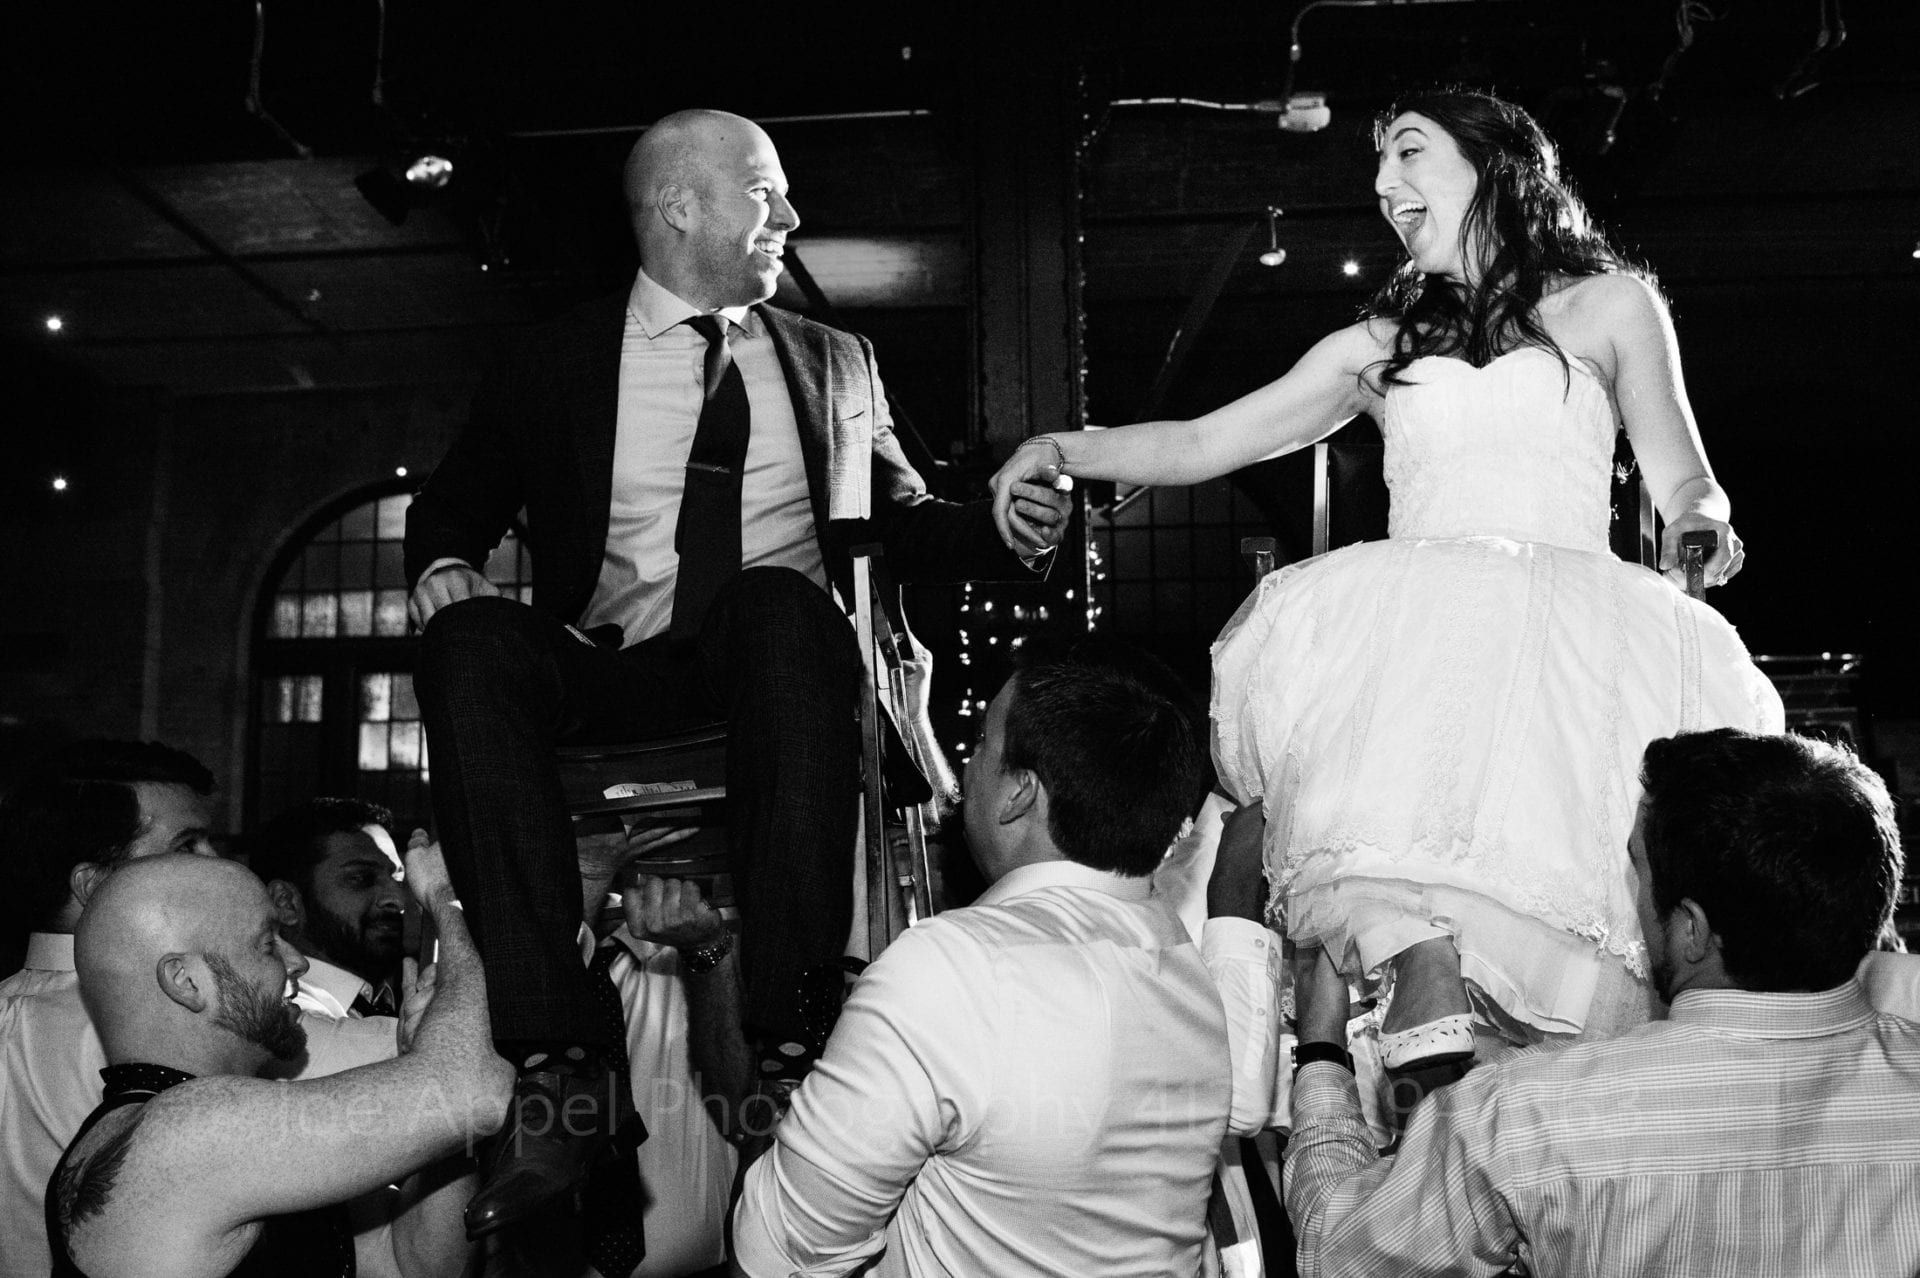 Black and white photo of a bride and groom holding hands as they're lifted up on chairs during their wedding reception.